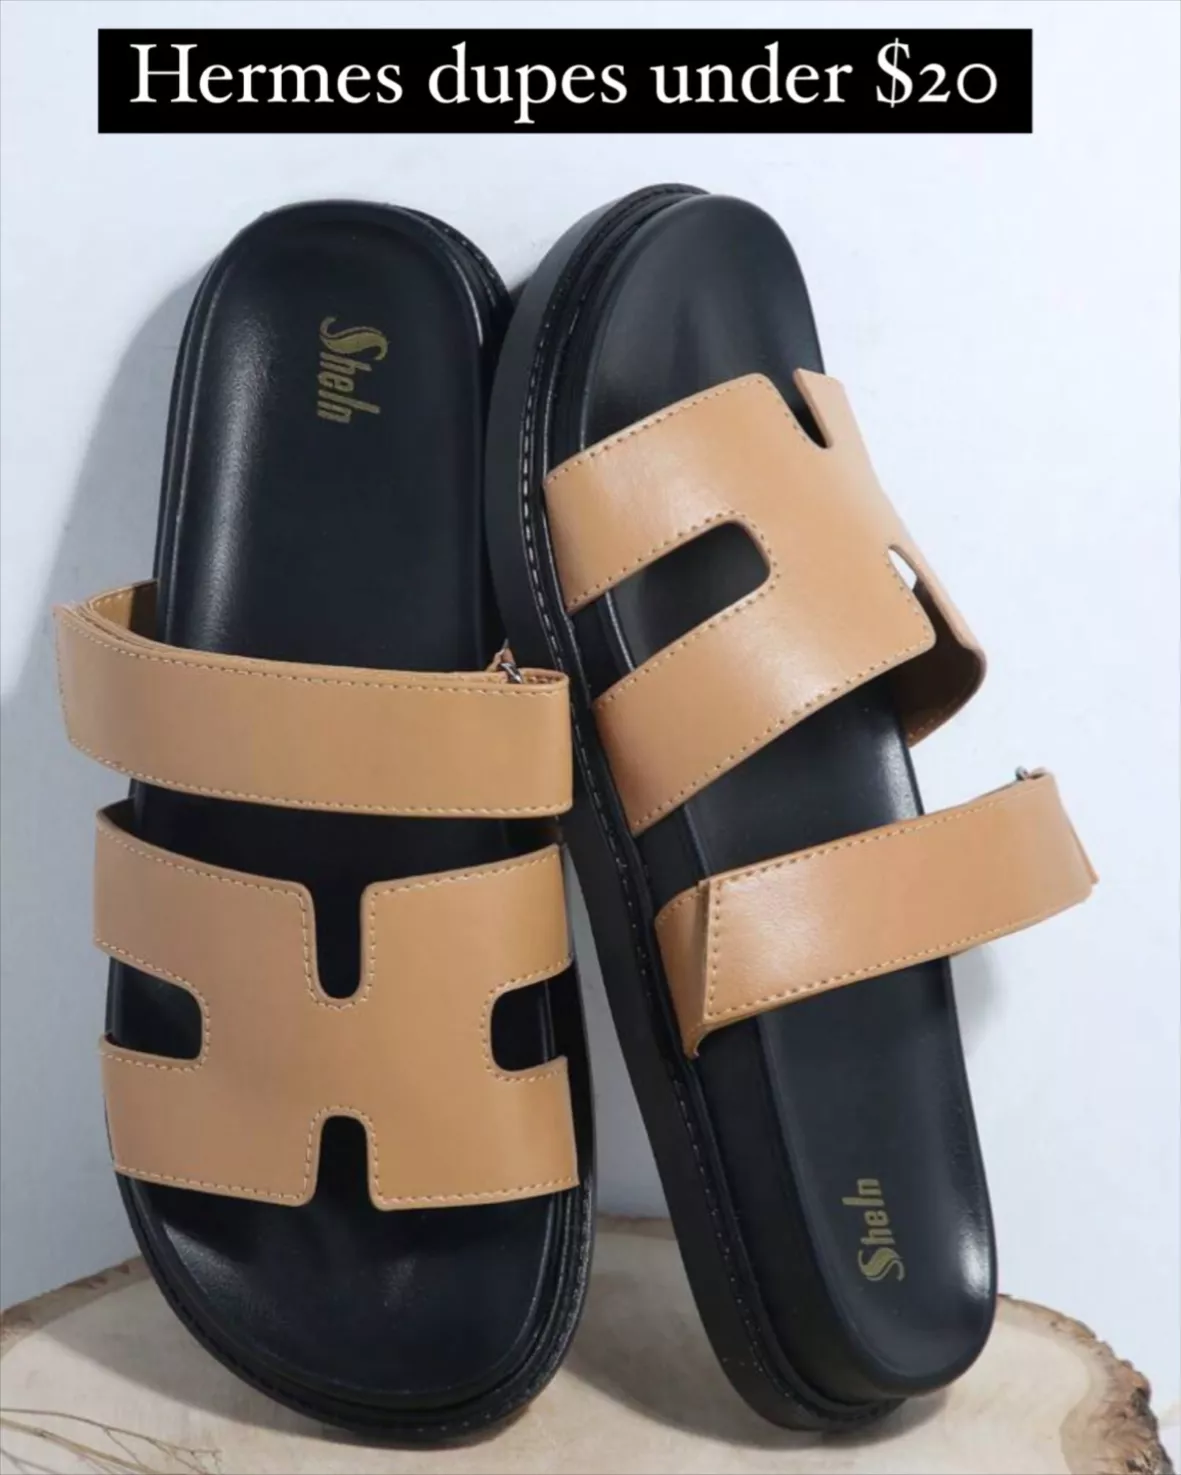 Louis vuitton neverfull fashion, Gladiator Sandals Outfit